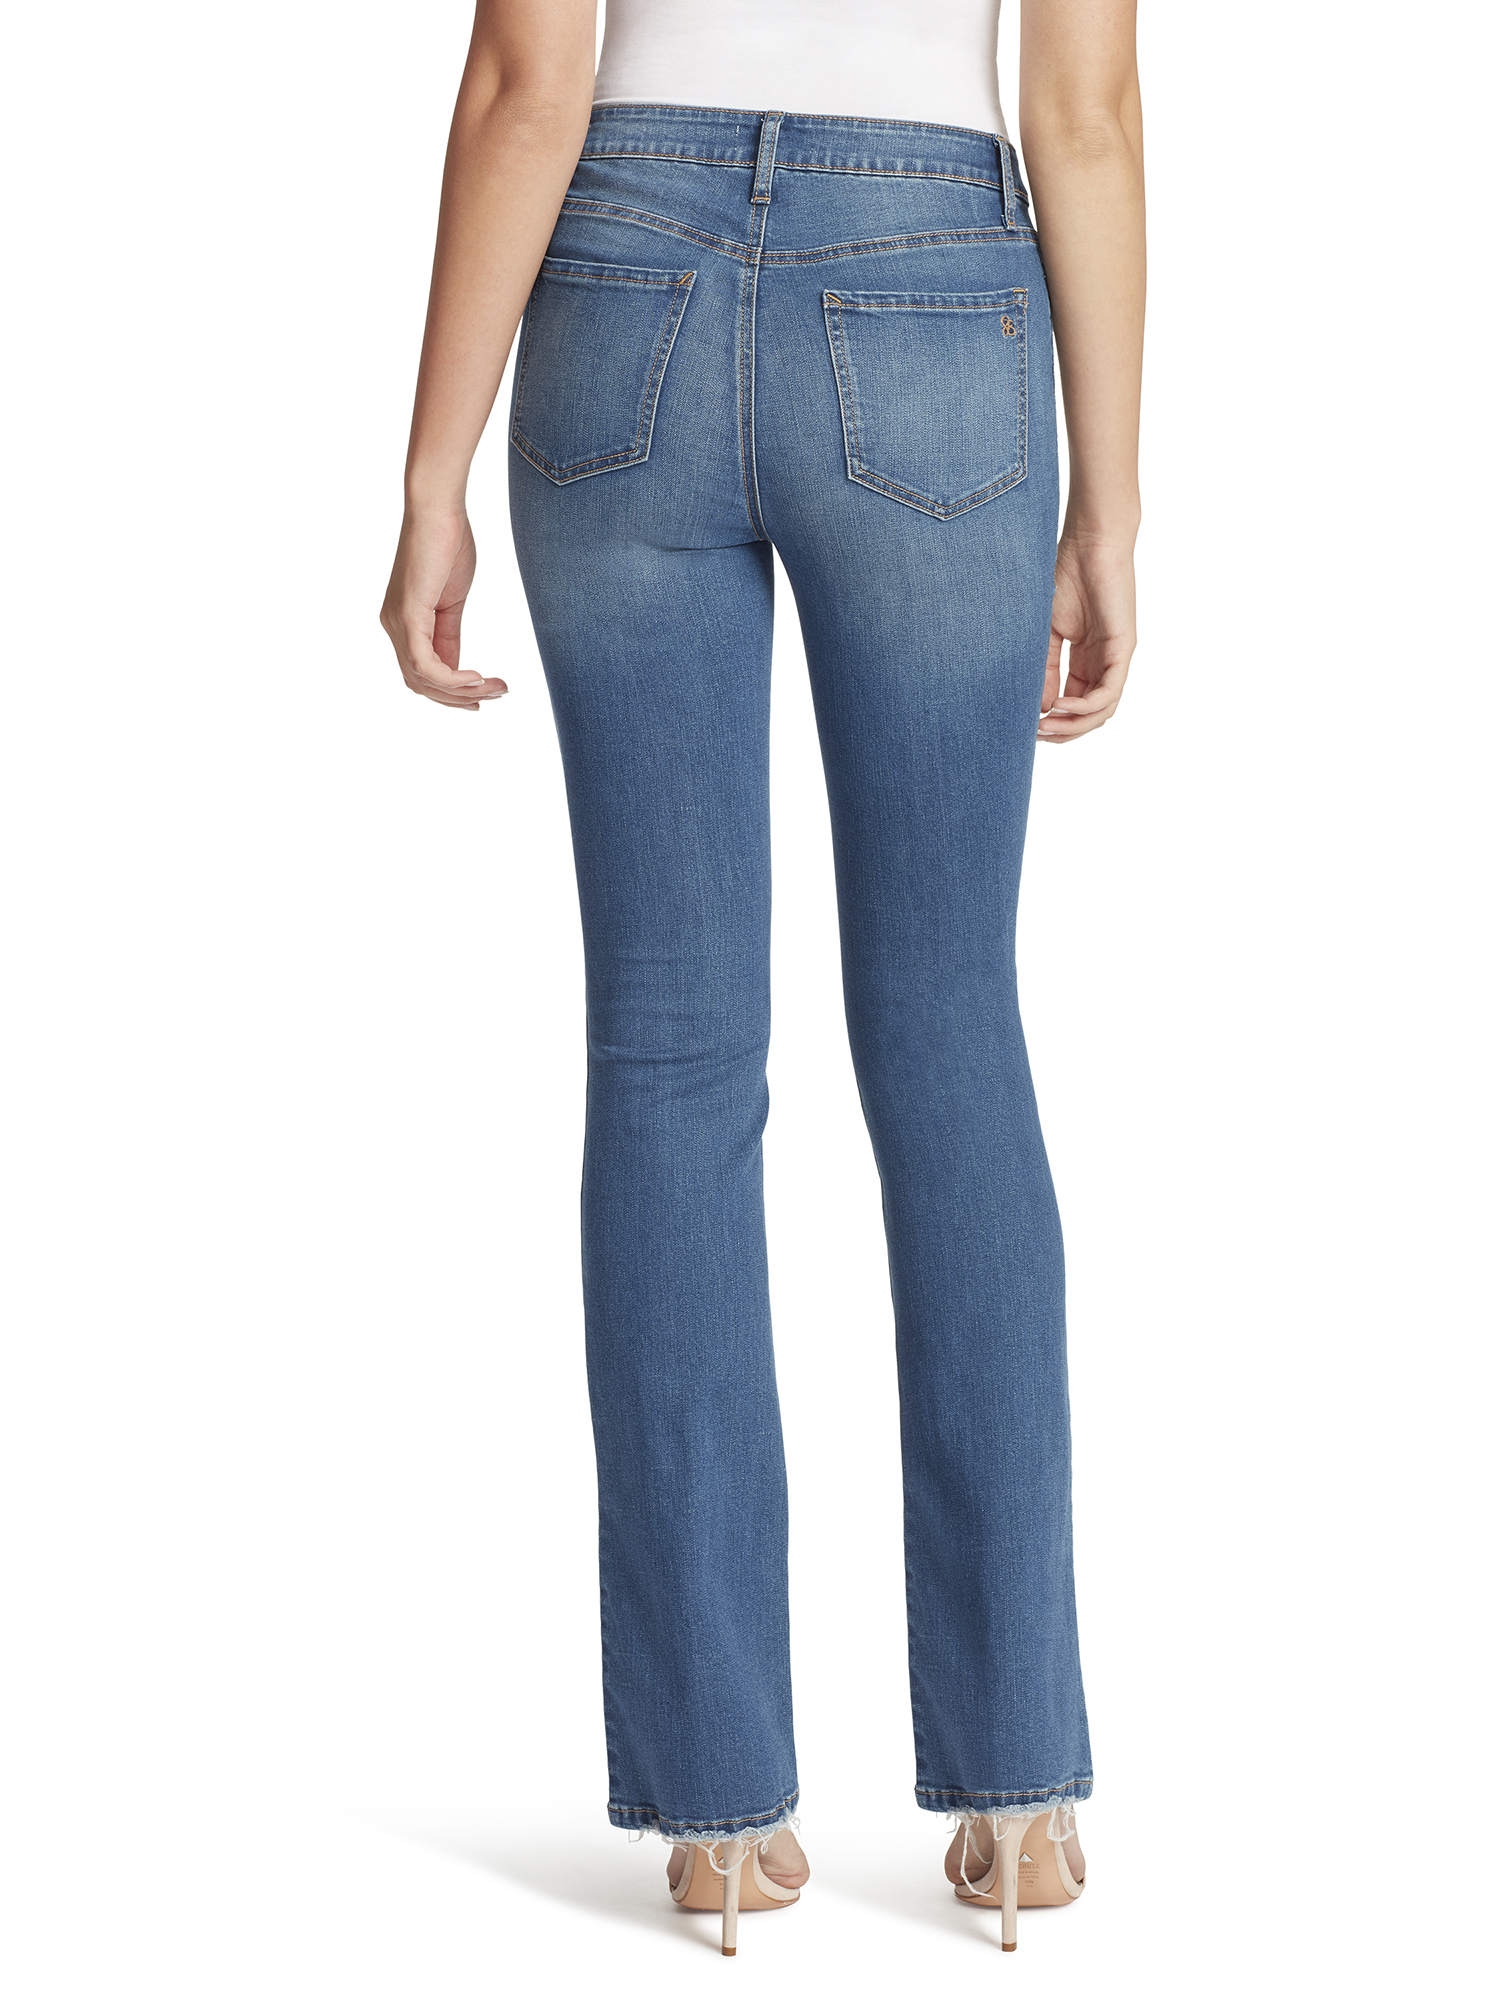 Jessica Simpson Women's Truly Yours Bootcut Jean - image 2 of 3